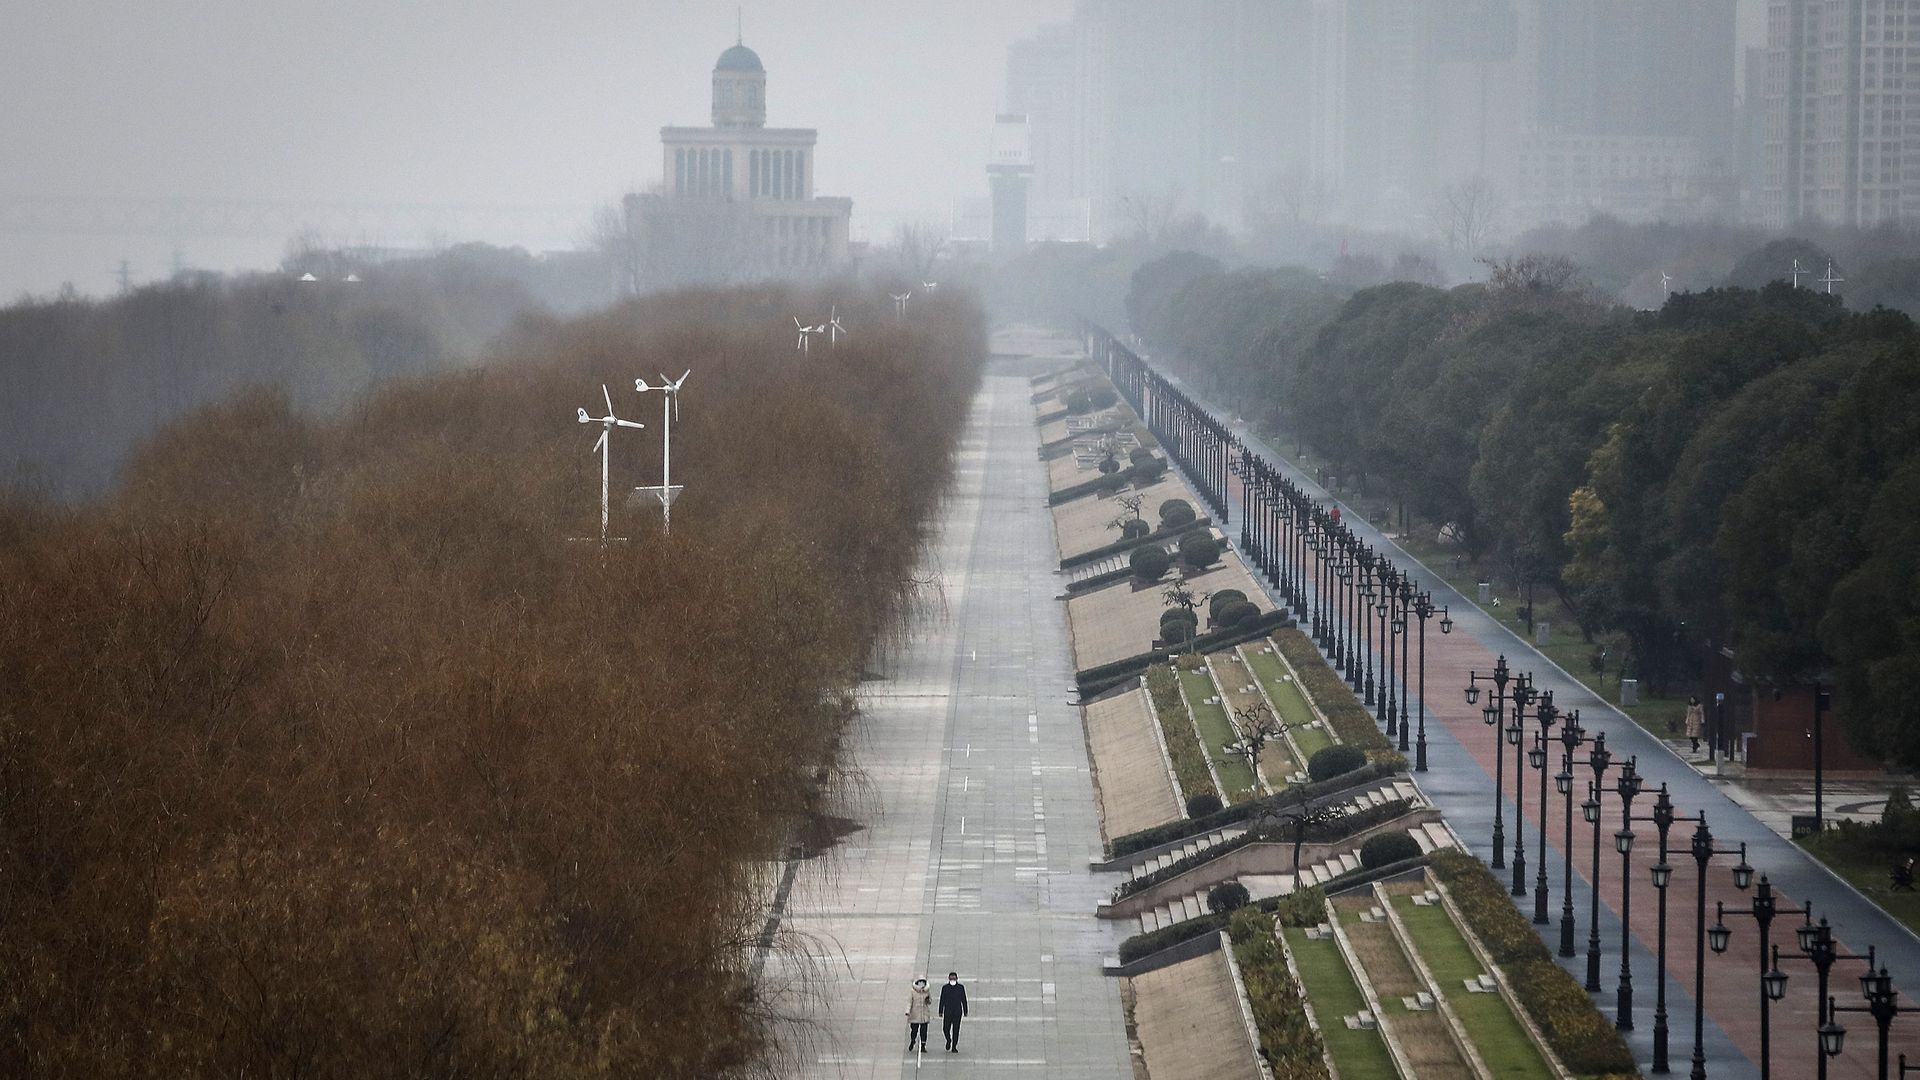 Two lone pedestrians walking in deserted aerial view of Jiangtan Park in Wuhan, China